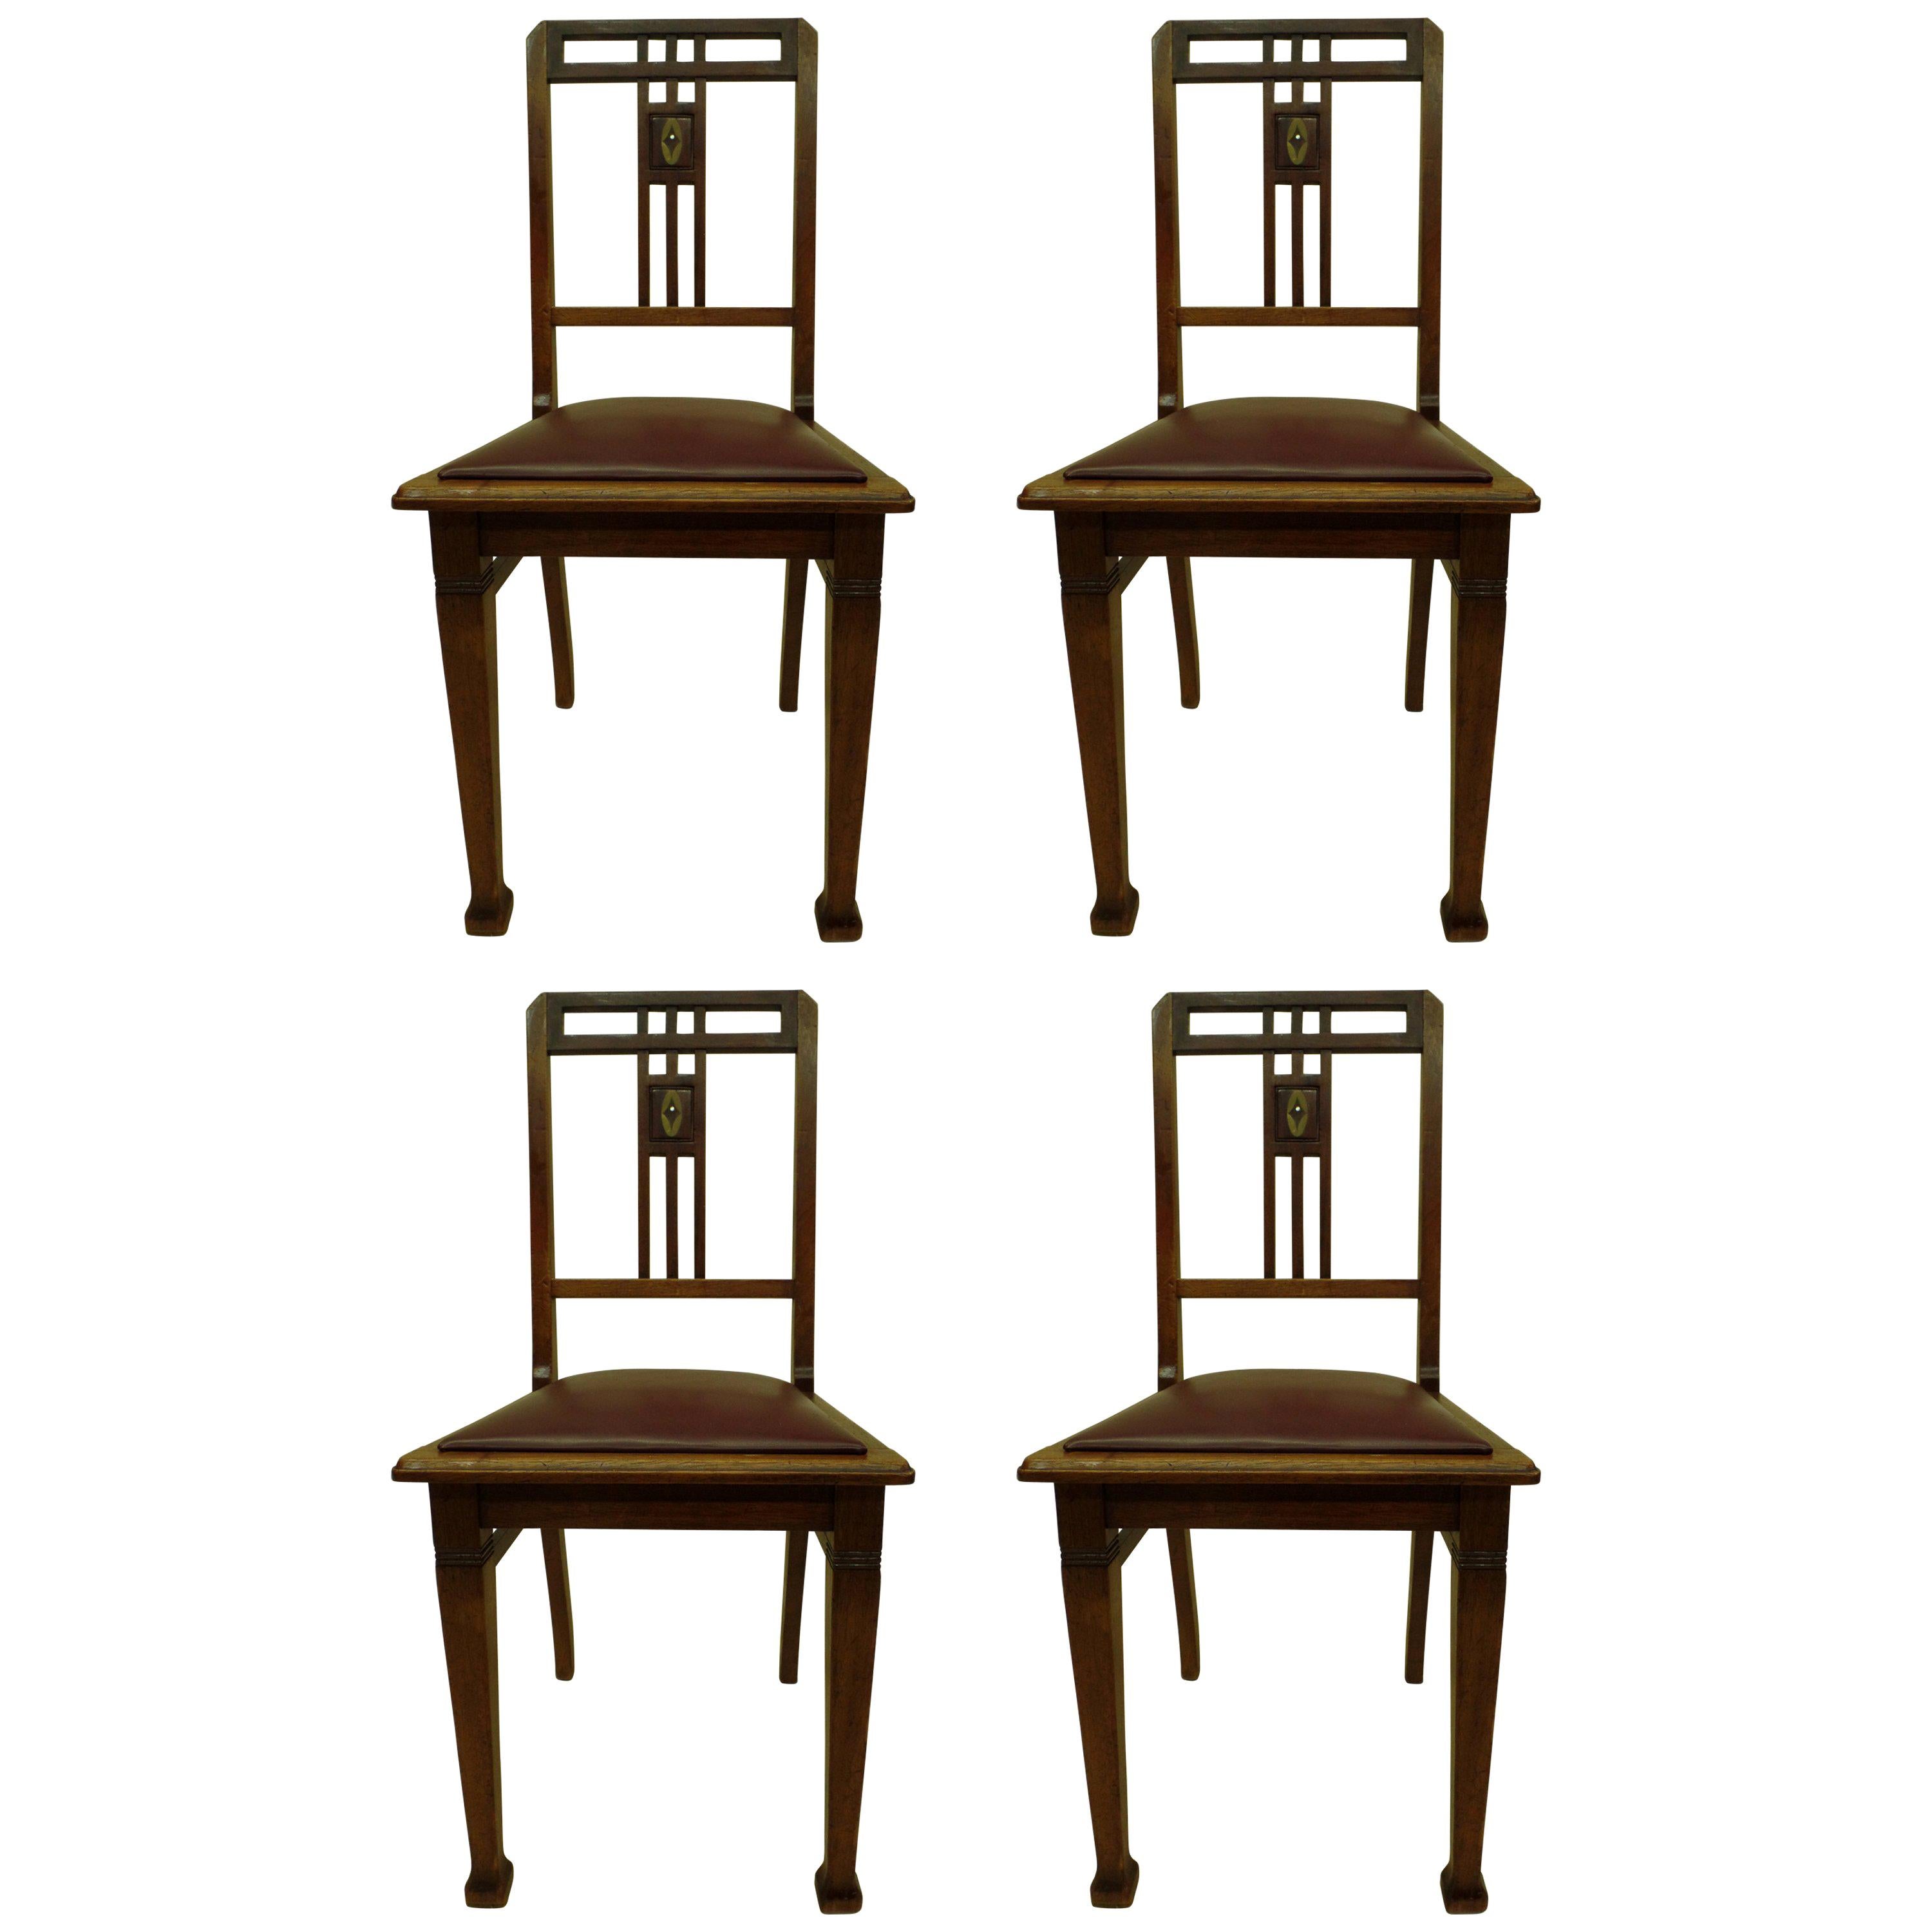 Four French Early Modernist Wood Dining Chairs with Inlaid Brass Grid Back